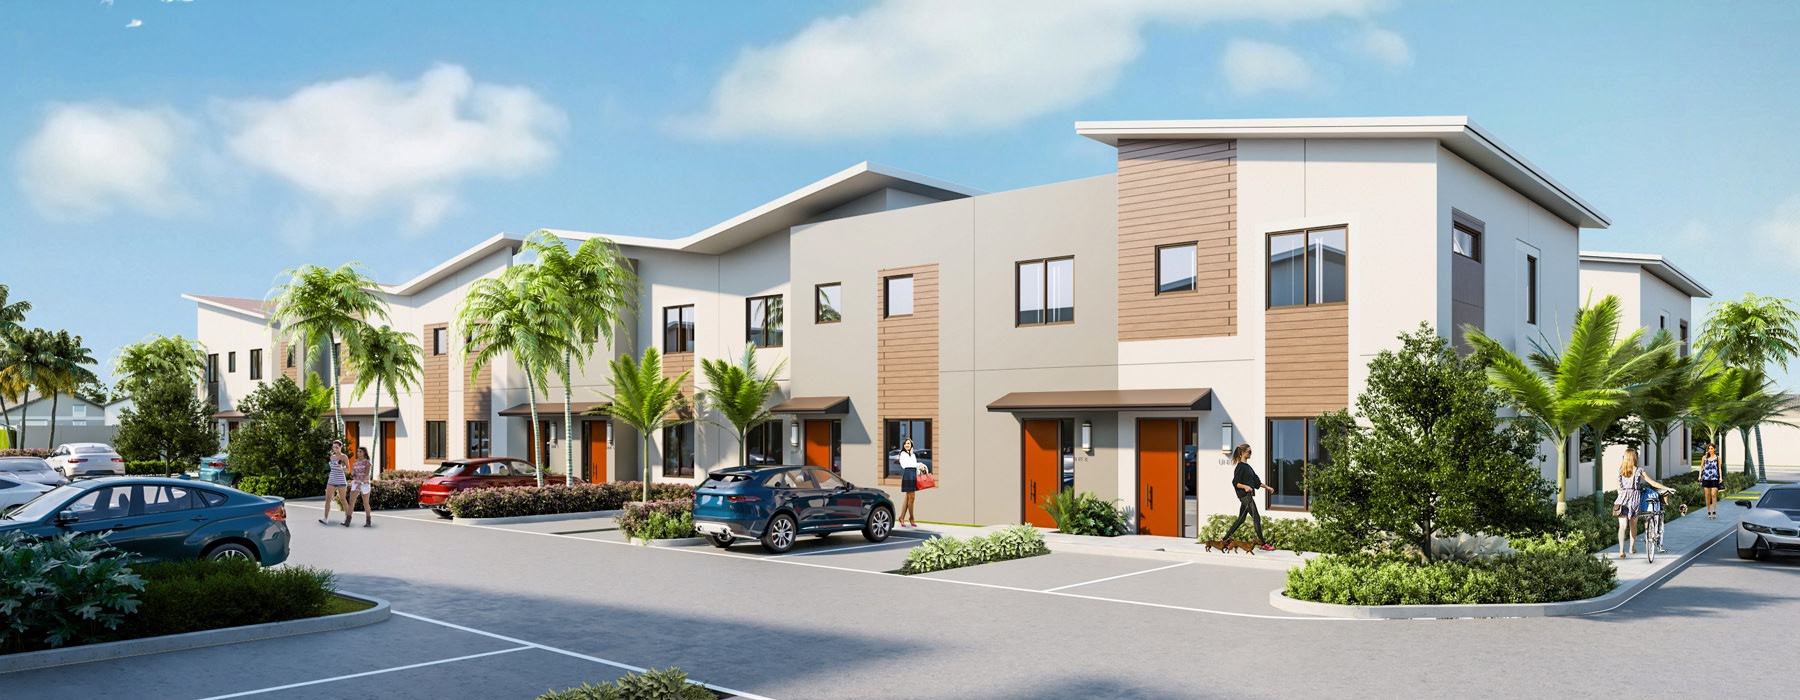 ID Oakland Park apartments rendering